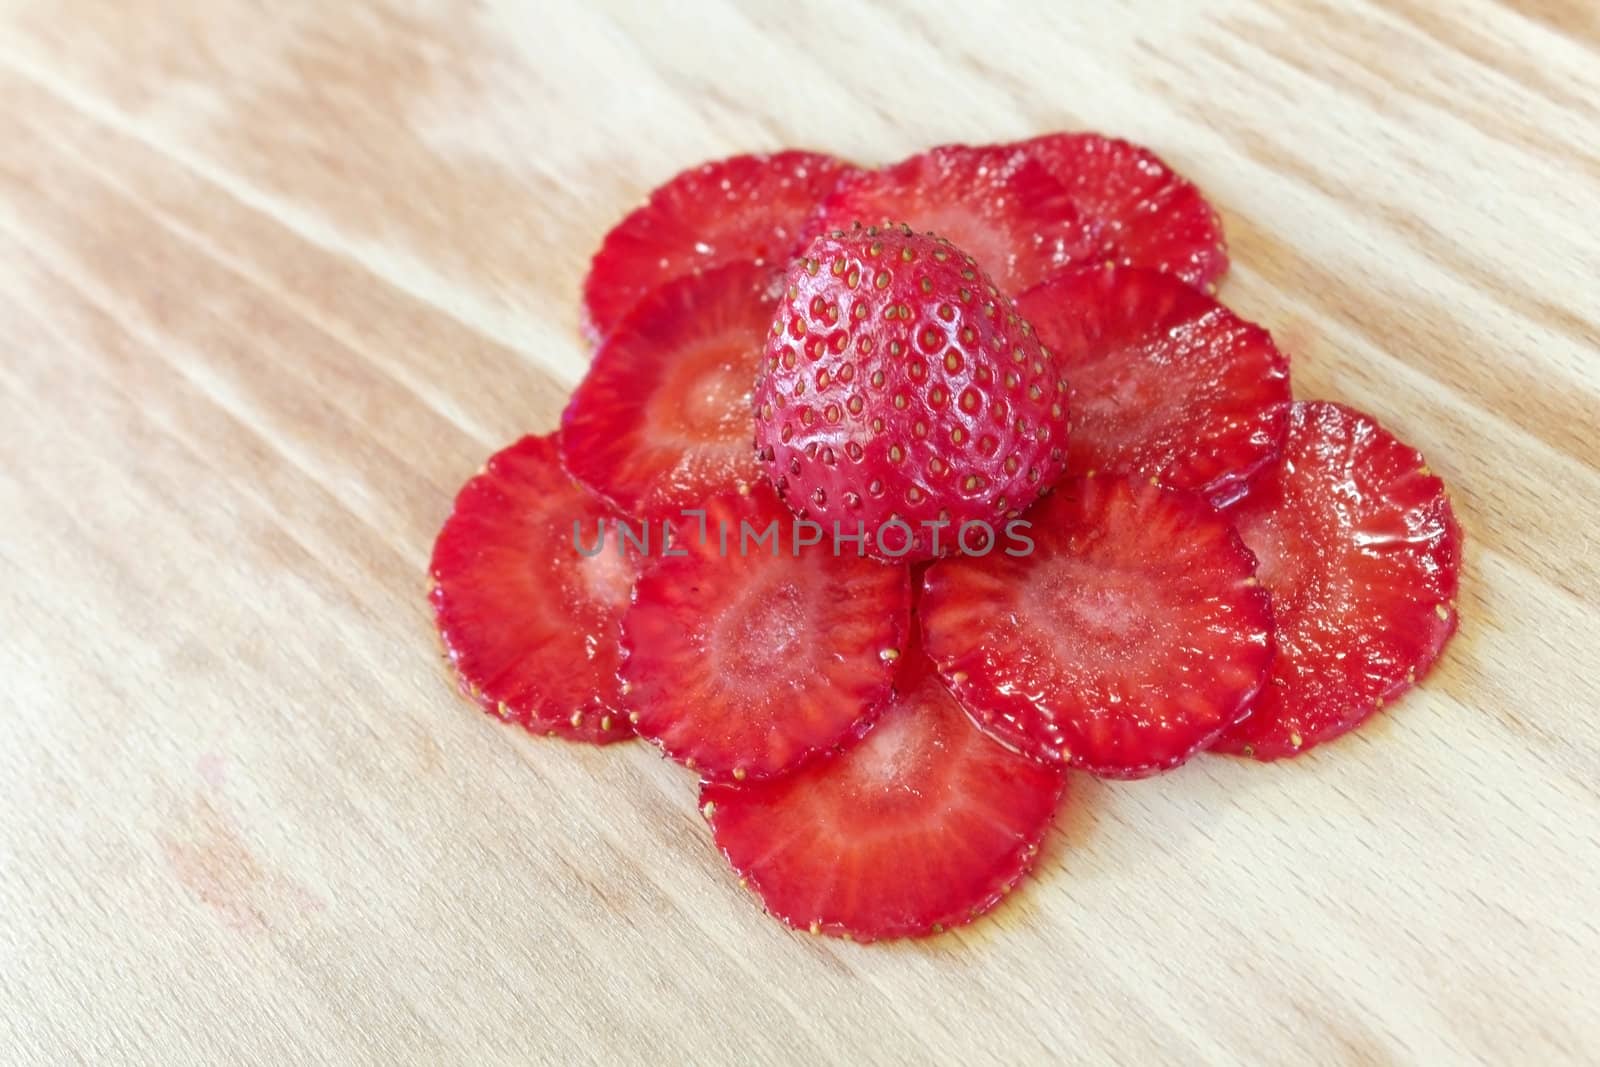 strawberries slices composed as flower on the cutting board